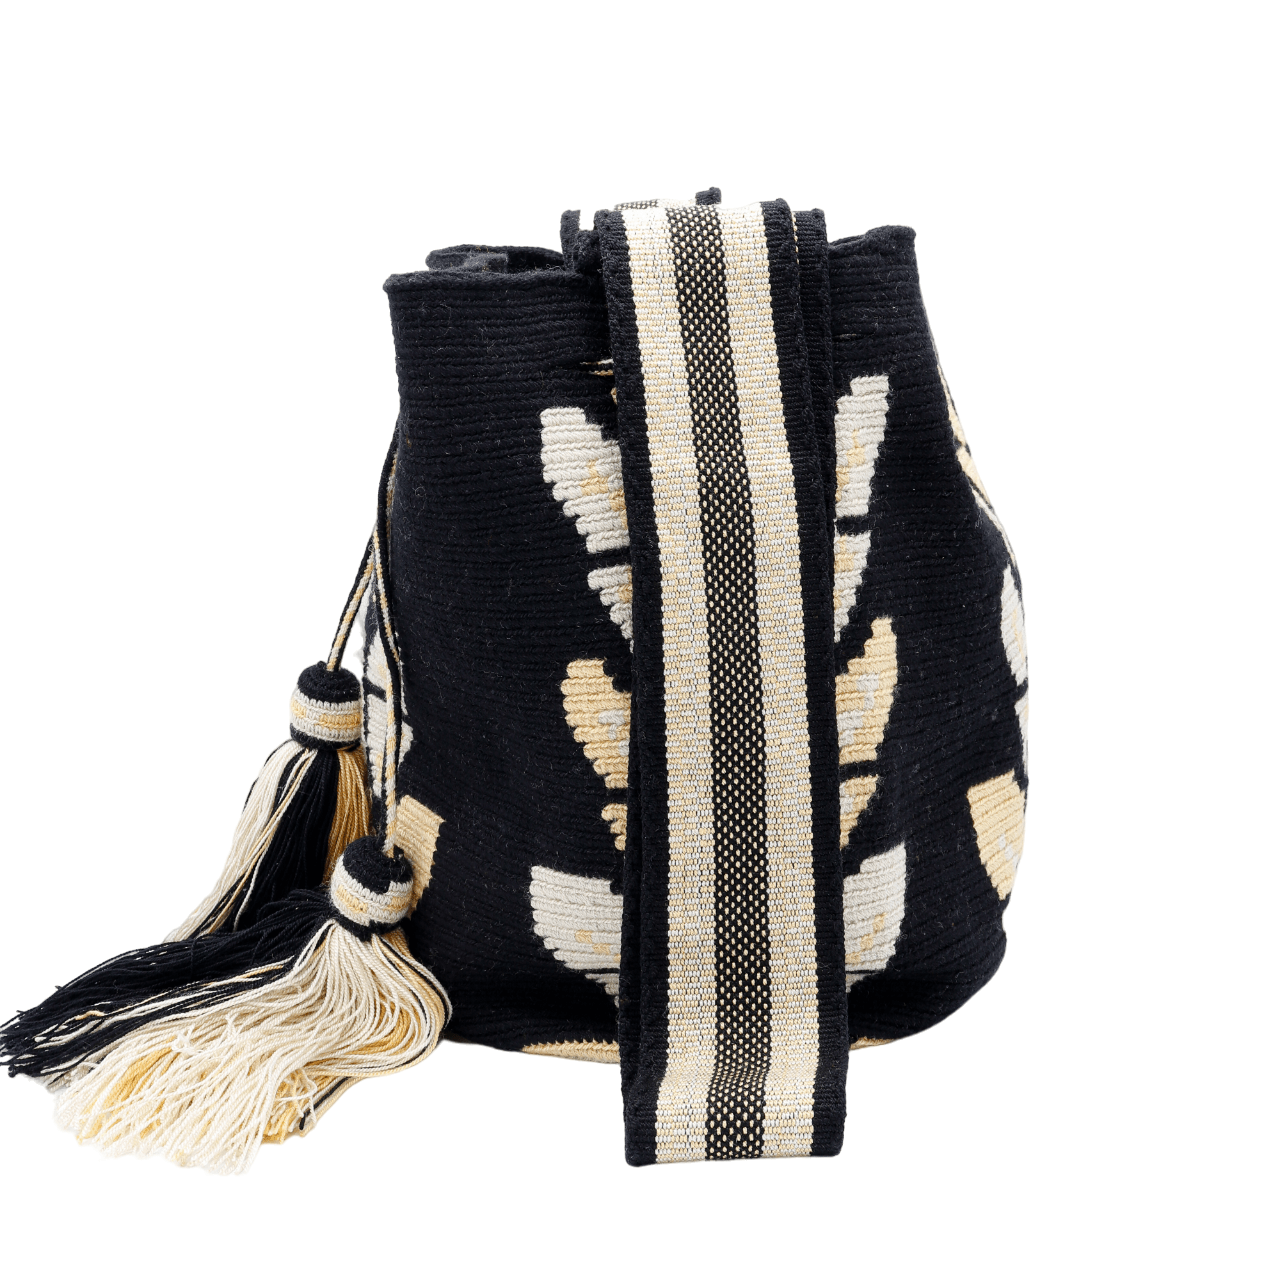 Discover the stunning Arabella Wayuu Mochila Bag in black, adorned with a charming butterflies design in vanilla and beige. This nature-inspired masterpiece evokes the beauty of the natural world, making it a captivating accessory choice.